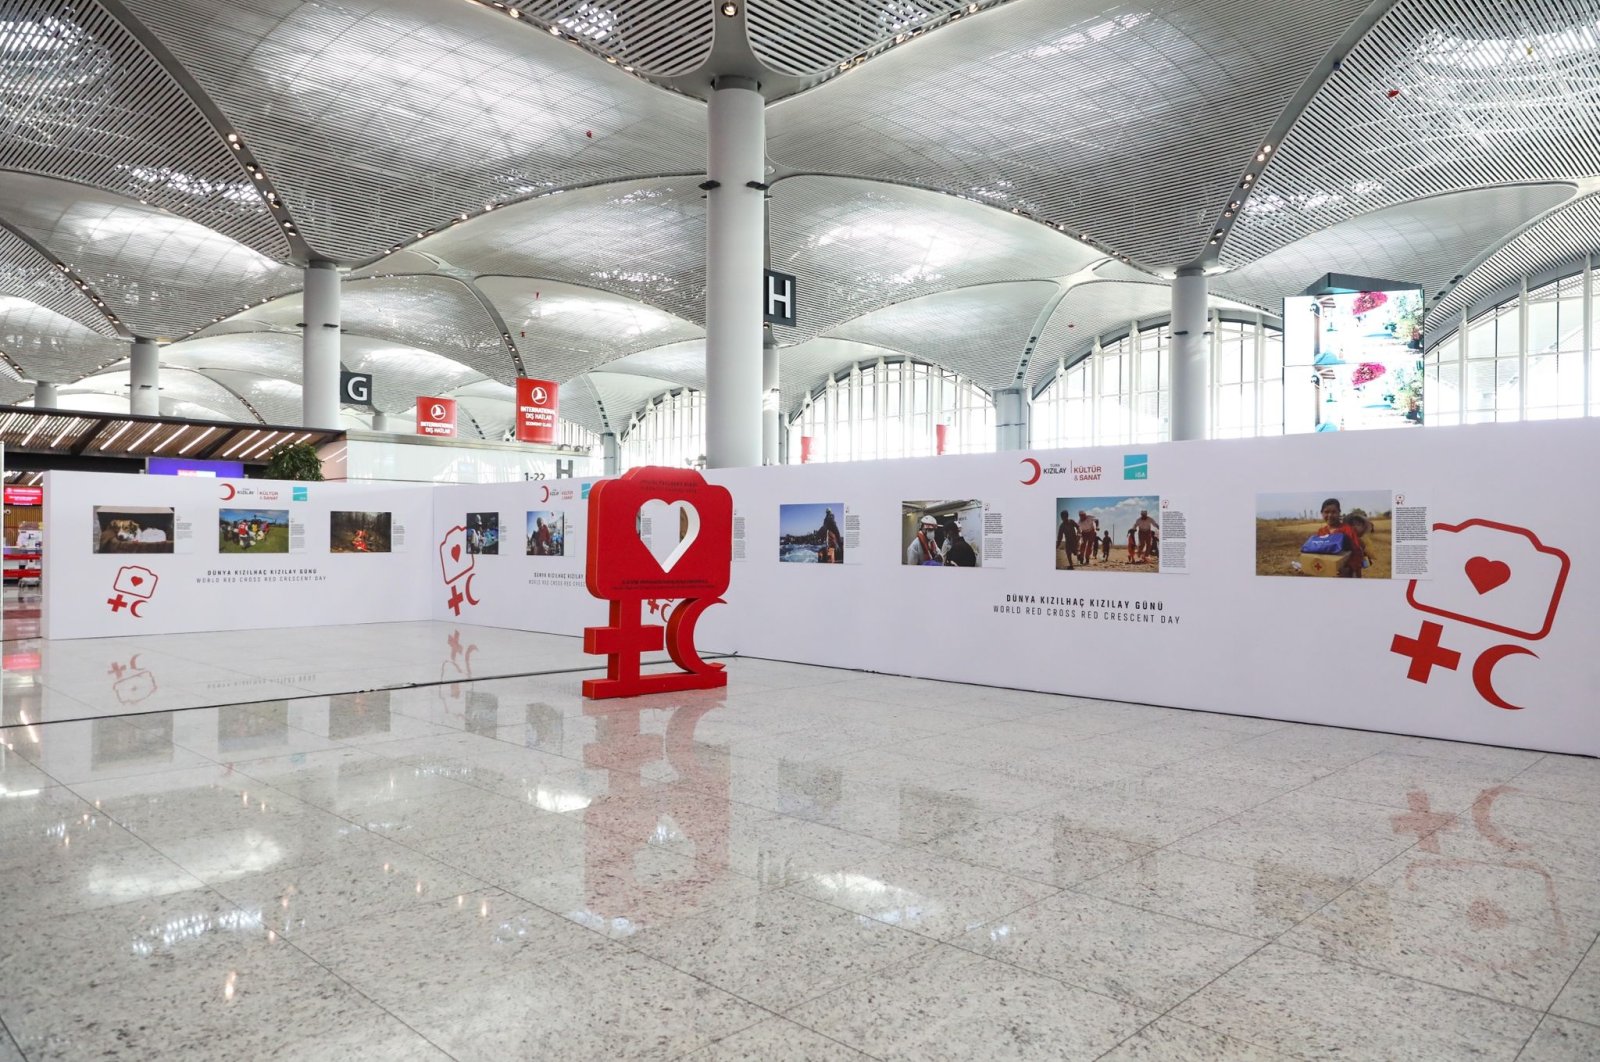 A general view from the “Meeting in Kindness” exhibition, Istanbul Airport, Istanbul, Turkey, May 8, 2022.